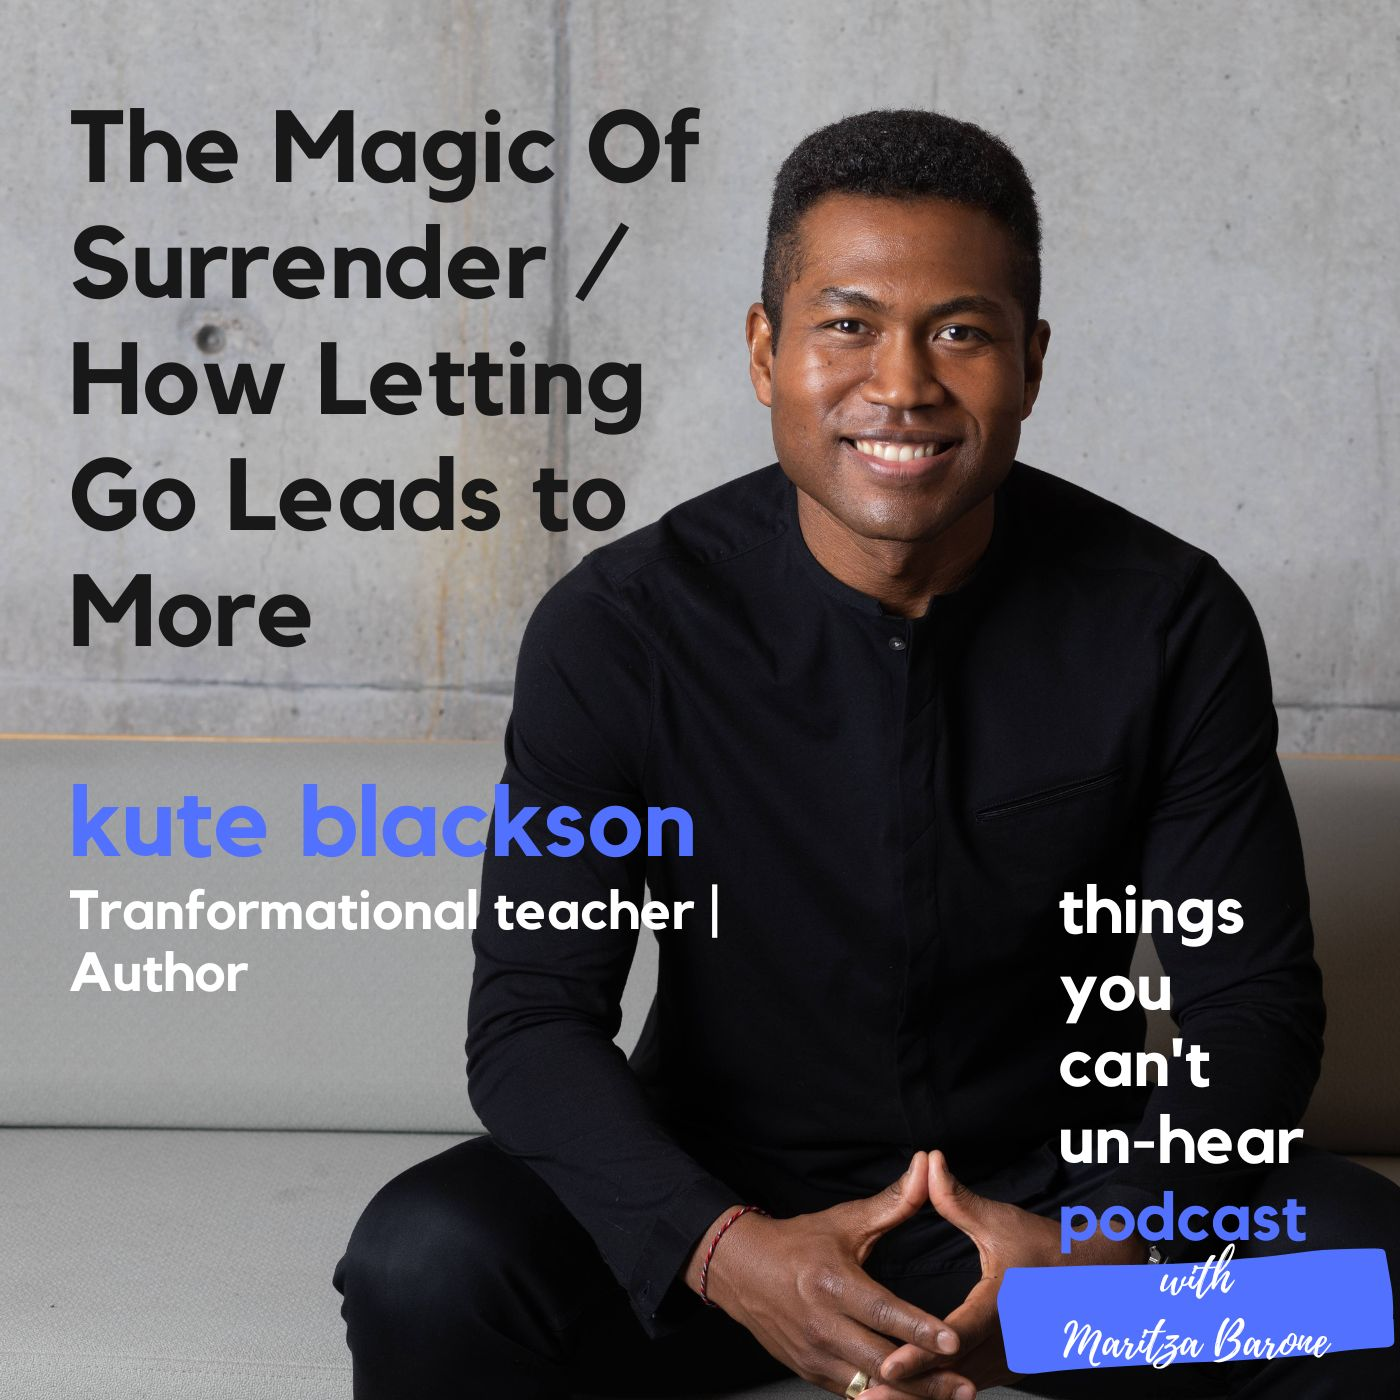 Kute Blackson // The Magic Of Surrender - How Letting Go Can Lead to More